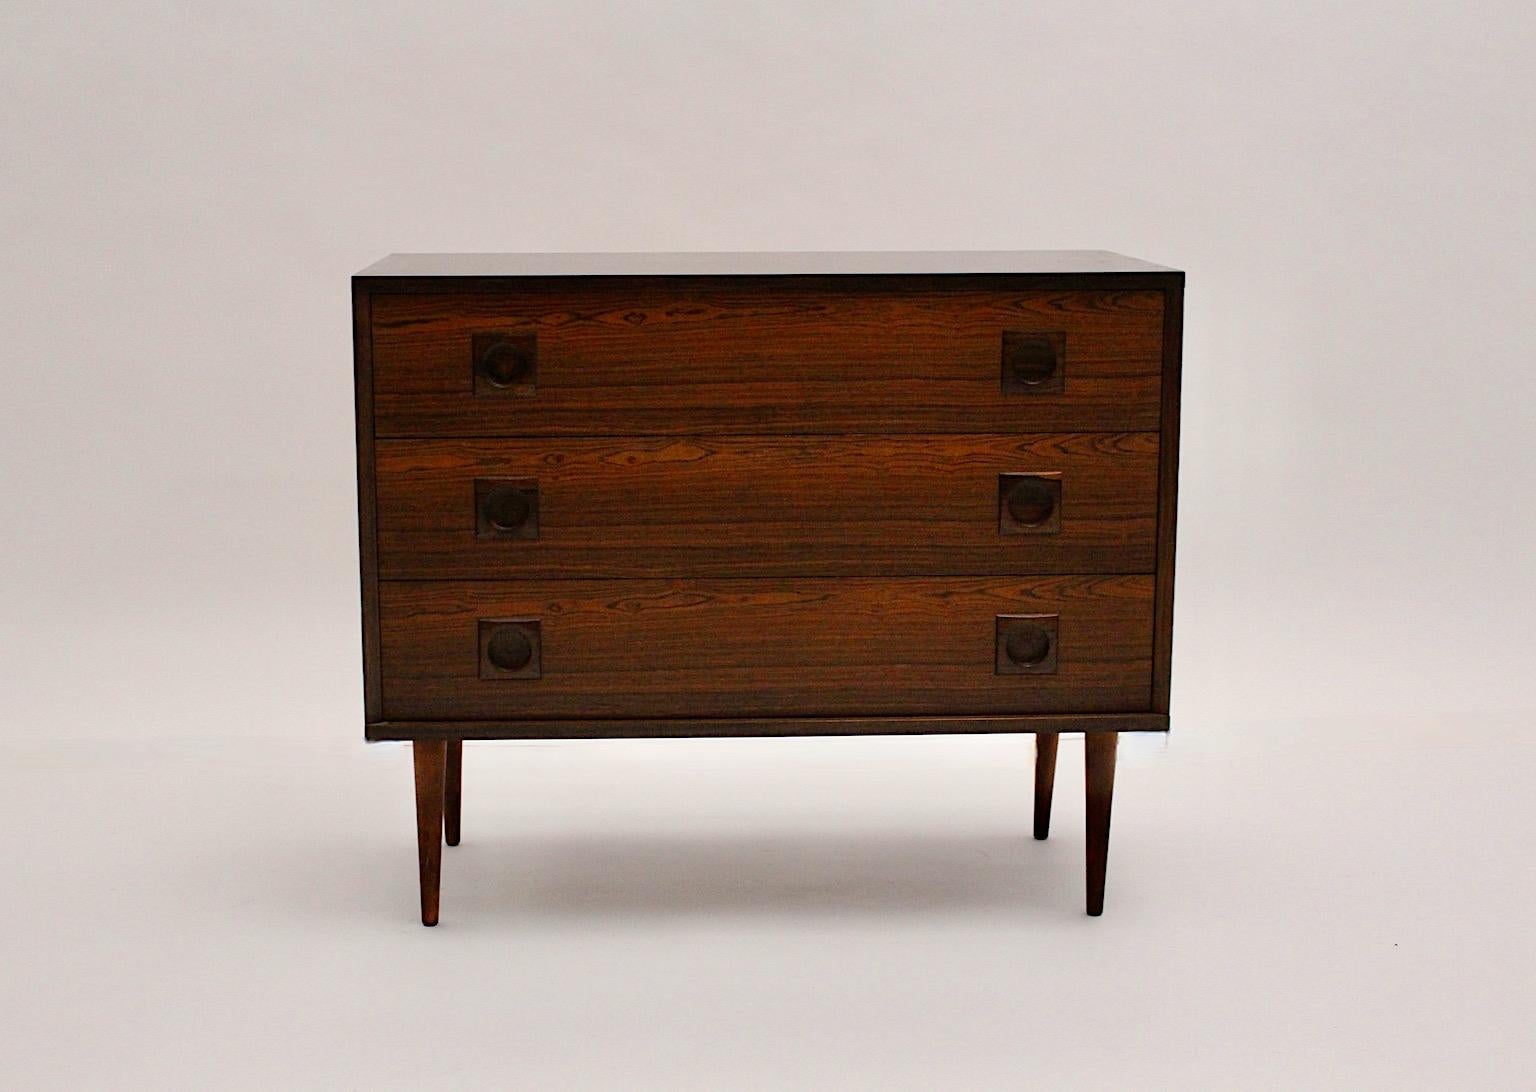 Scandinavian Modern organic vintage chest of drawers or commodes from teak designed and manufactured, 1960s, Denmark.
An amazing chest with three (3) drawers and much storage space shows a beautiful wood veneer in brown and dark brown color